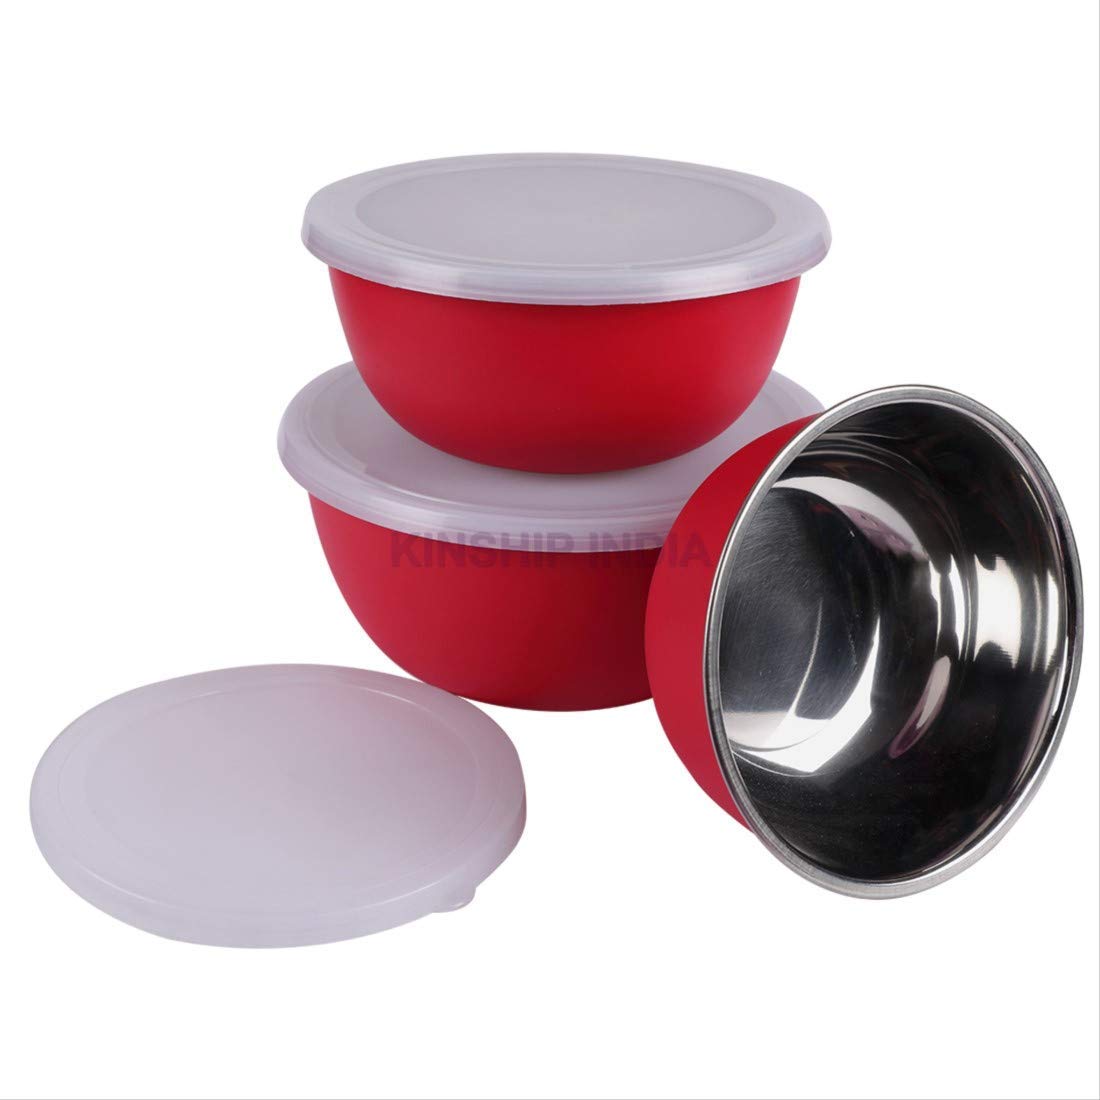 Stainless Steel Plastic Coated Euro Bowls Set Of 3